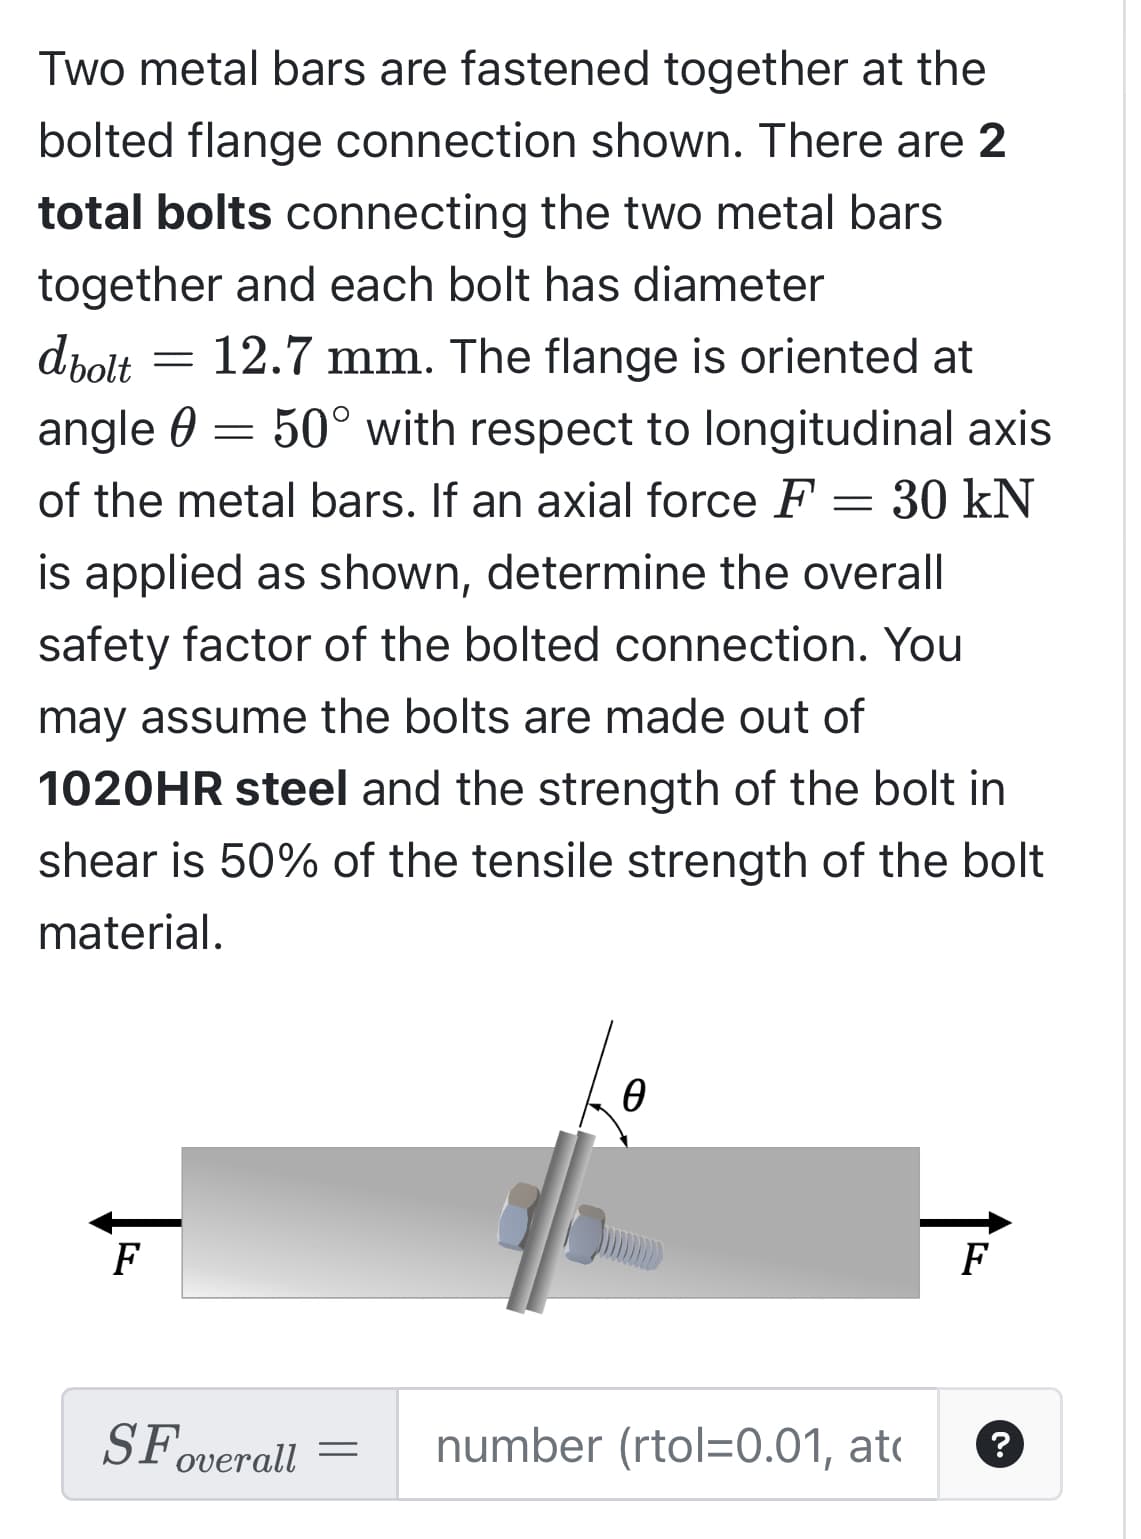 Two metal bars are fastened together at the
bolted flange connection shown. There are 2
total bolts connecting the two metal bars
together and each bolt has diameter
dbolt
12.7 mm. The flange is oriented at
angle = 50° with respect to longitudinal axis
of the metal bars. If an axial force F = 30 kN
is applied as shown, determine the overall
safety factor of the bolted connection. You
may assume the bolts are made out of
1020HR steel and the strength of the bolt in
shear is 50% of the tensile strength of the bolt
material.
F
-
SF overall =
0
number (rtol=0.01, at
F
?